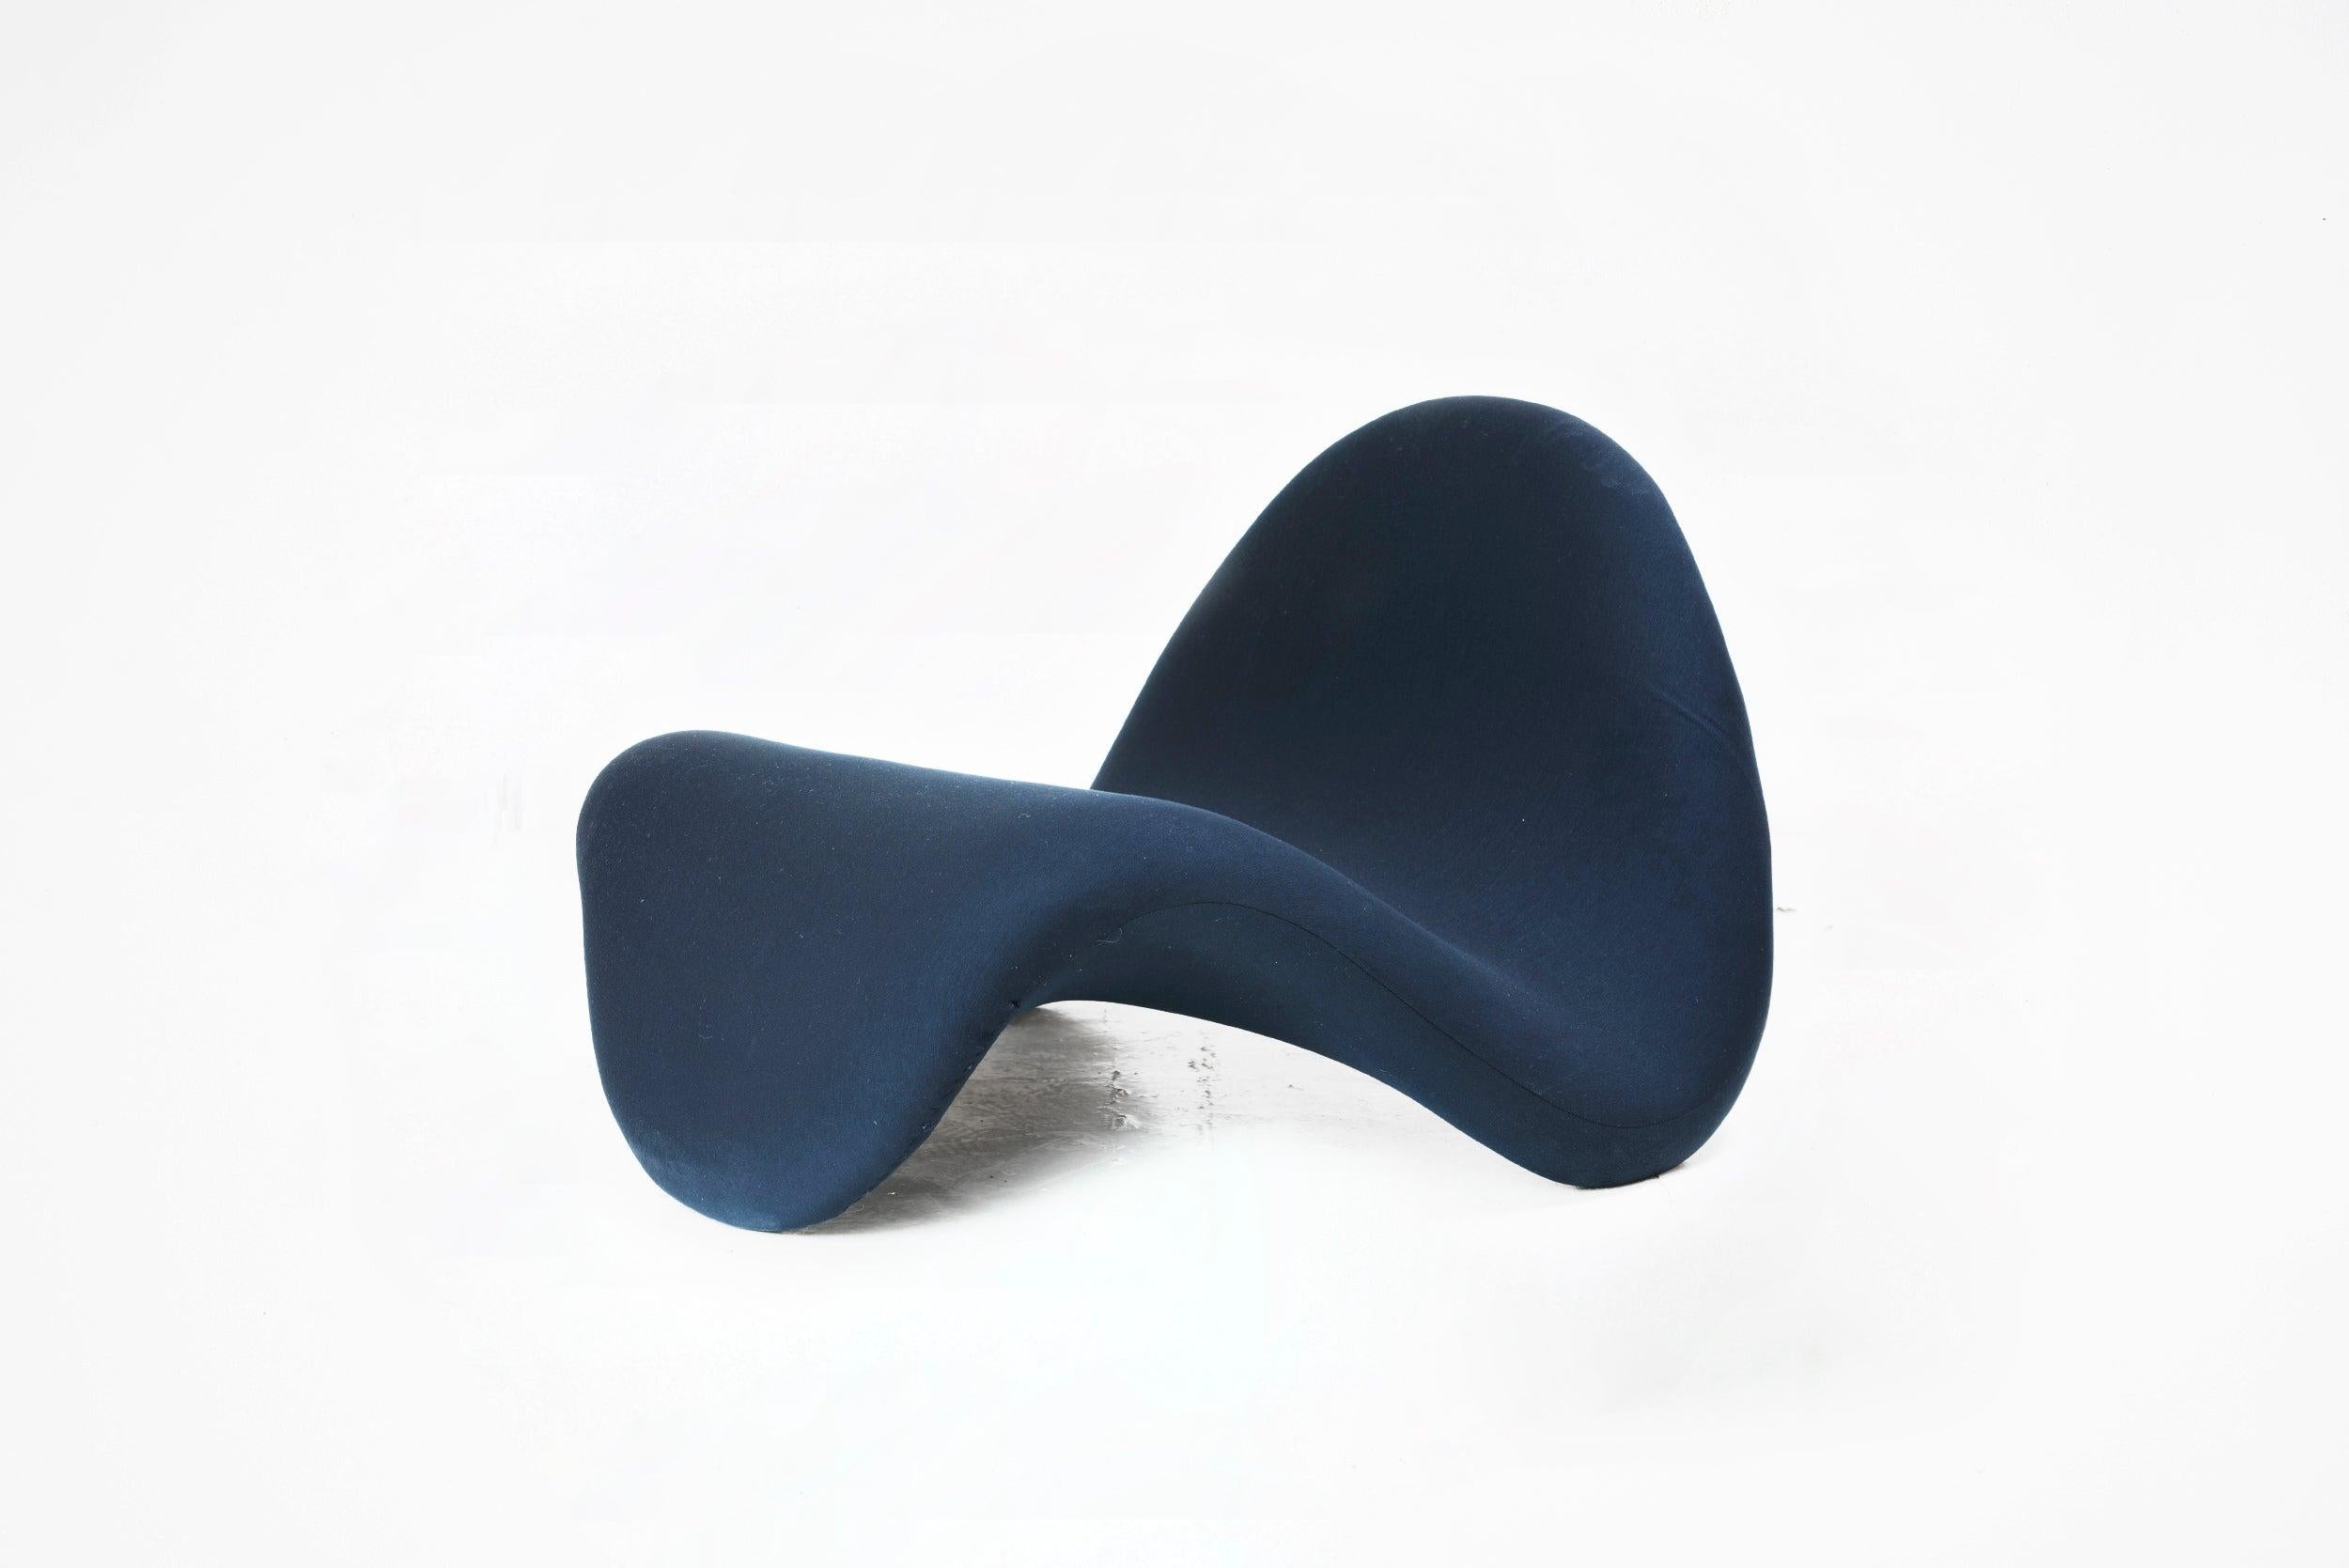 Pierre Paulin (1927-2009)
Lounge chair model “Tongue” 
Manufactured by Artifort 
France, 1960s
Steel, upholstery

Measurements:
34 in. x 35 in. x 24 in.
86.36 cm x D 88.9 cm x 60.69 cm

Provenance:
Private collection,